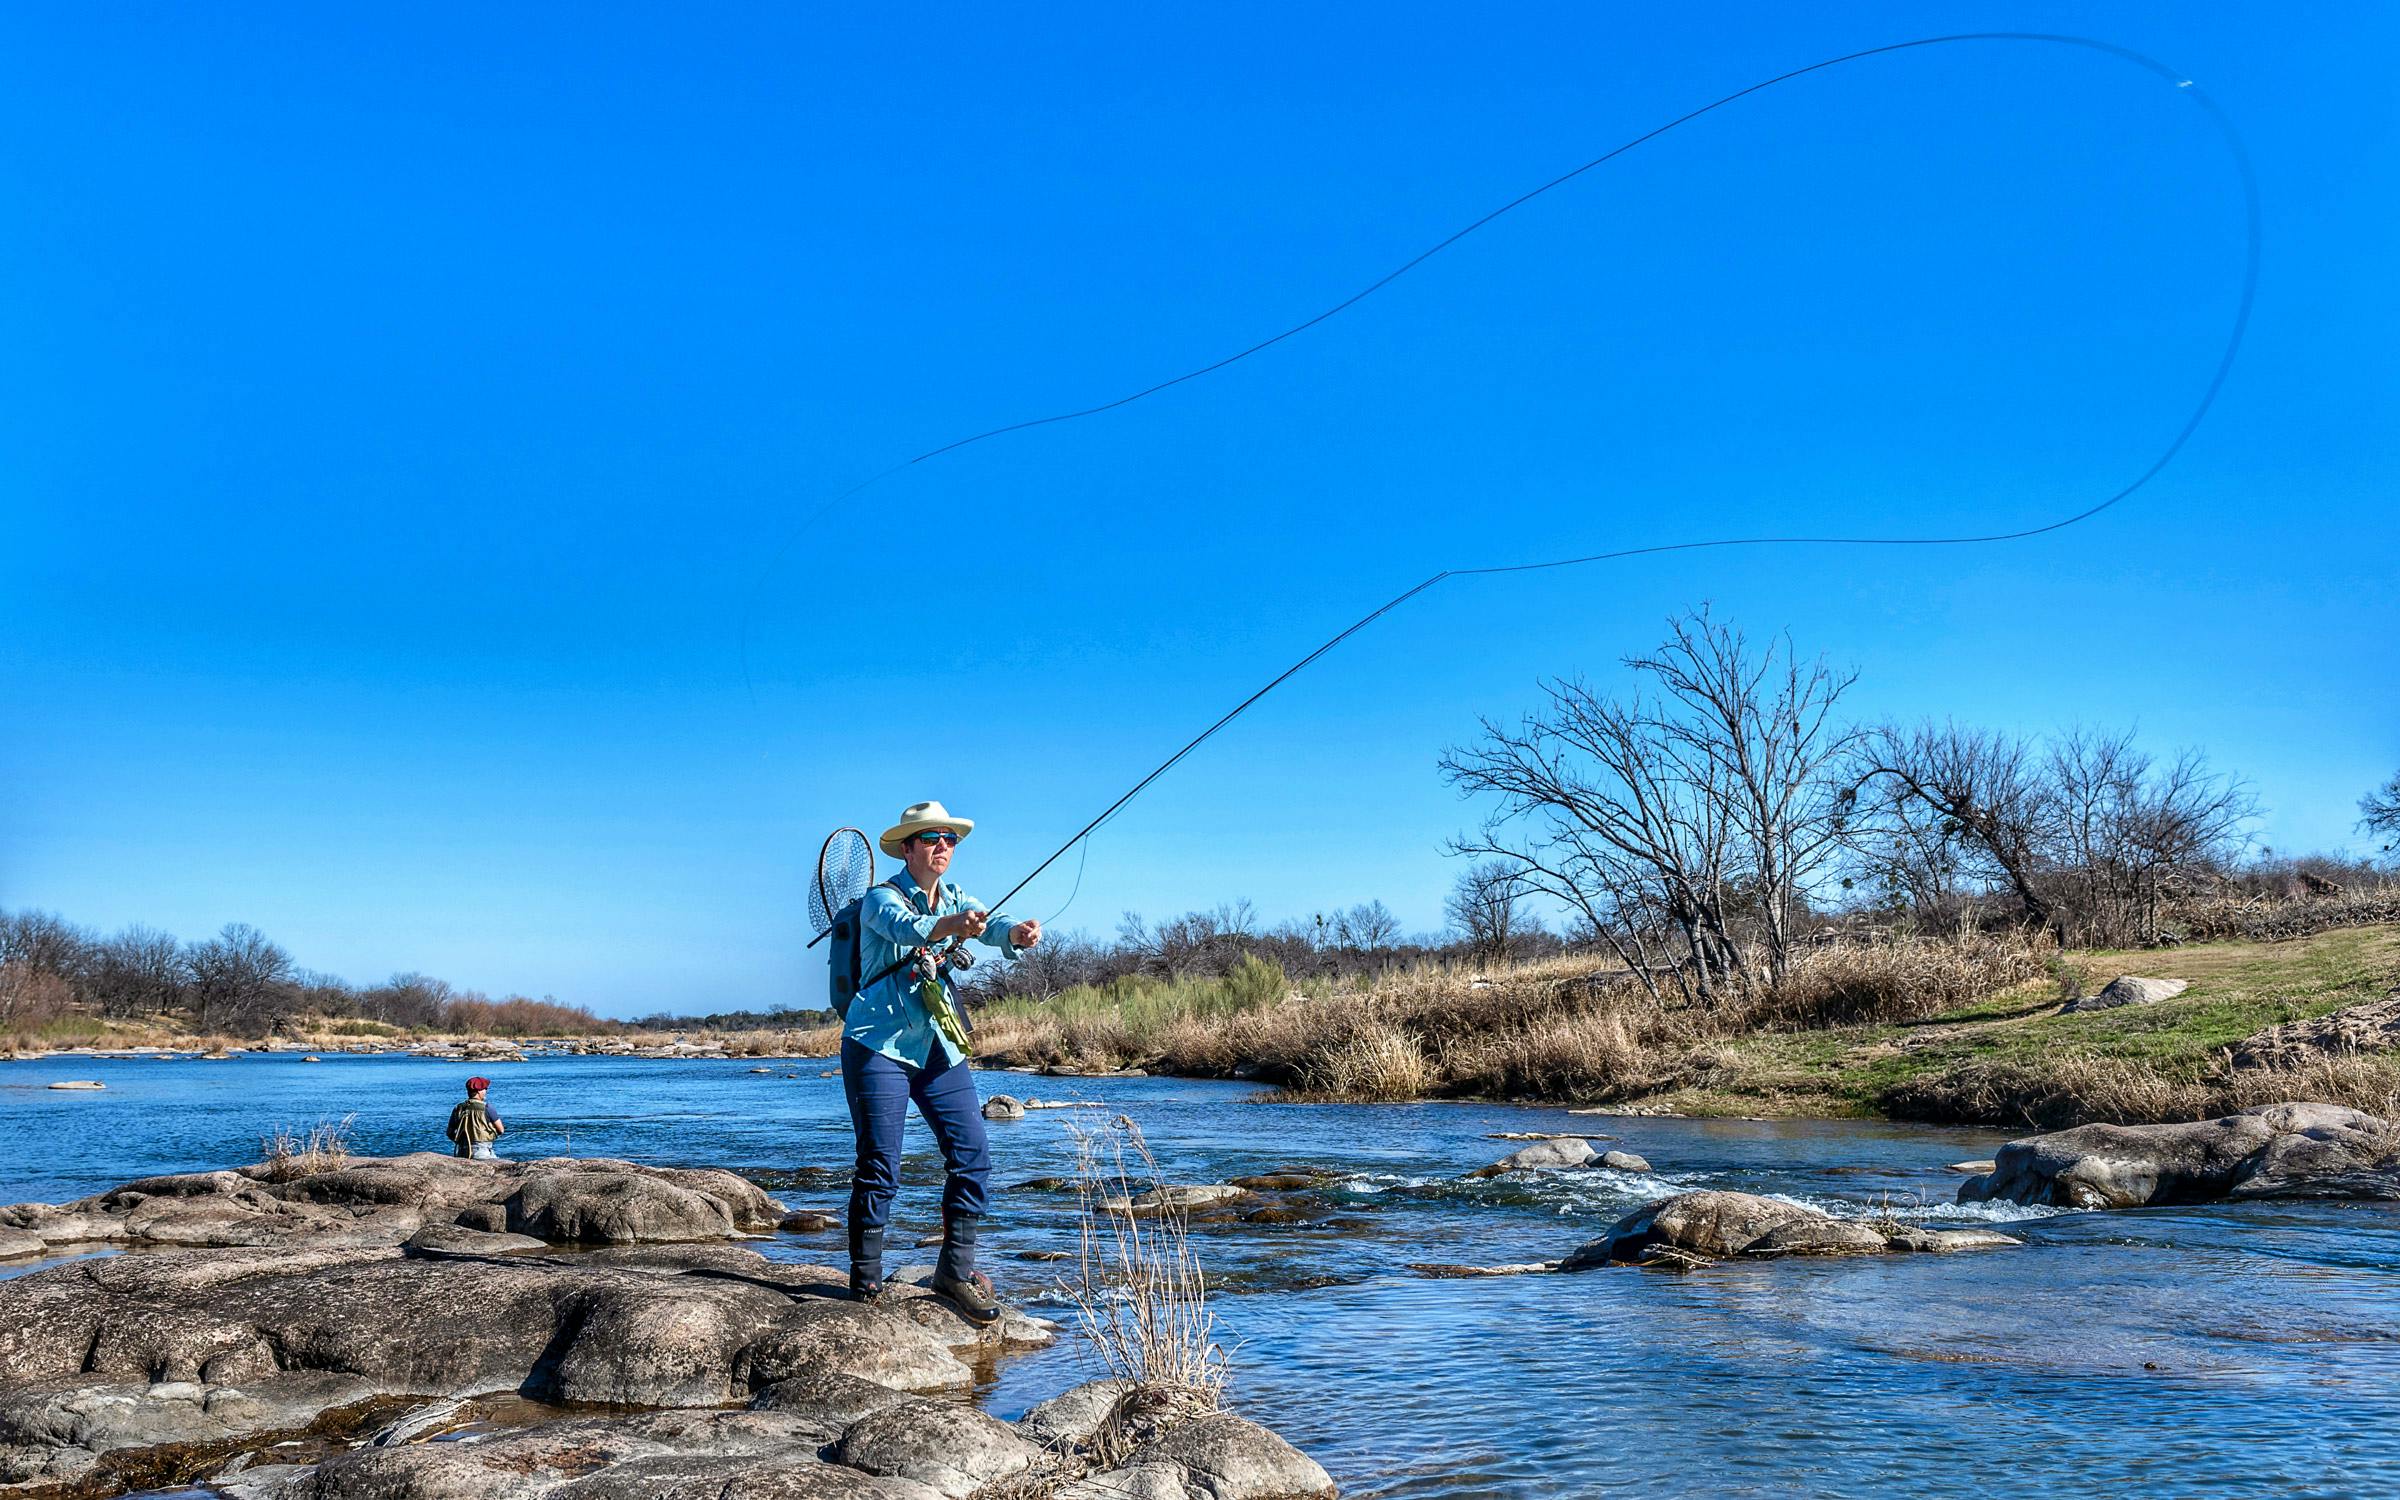 Old fly lines come alive, Global FlyFisher